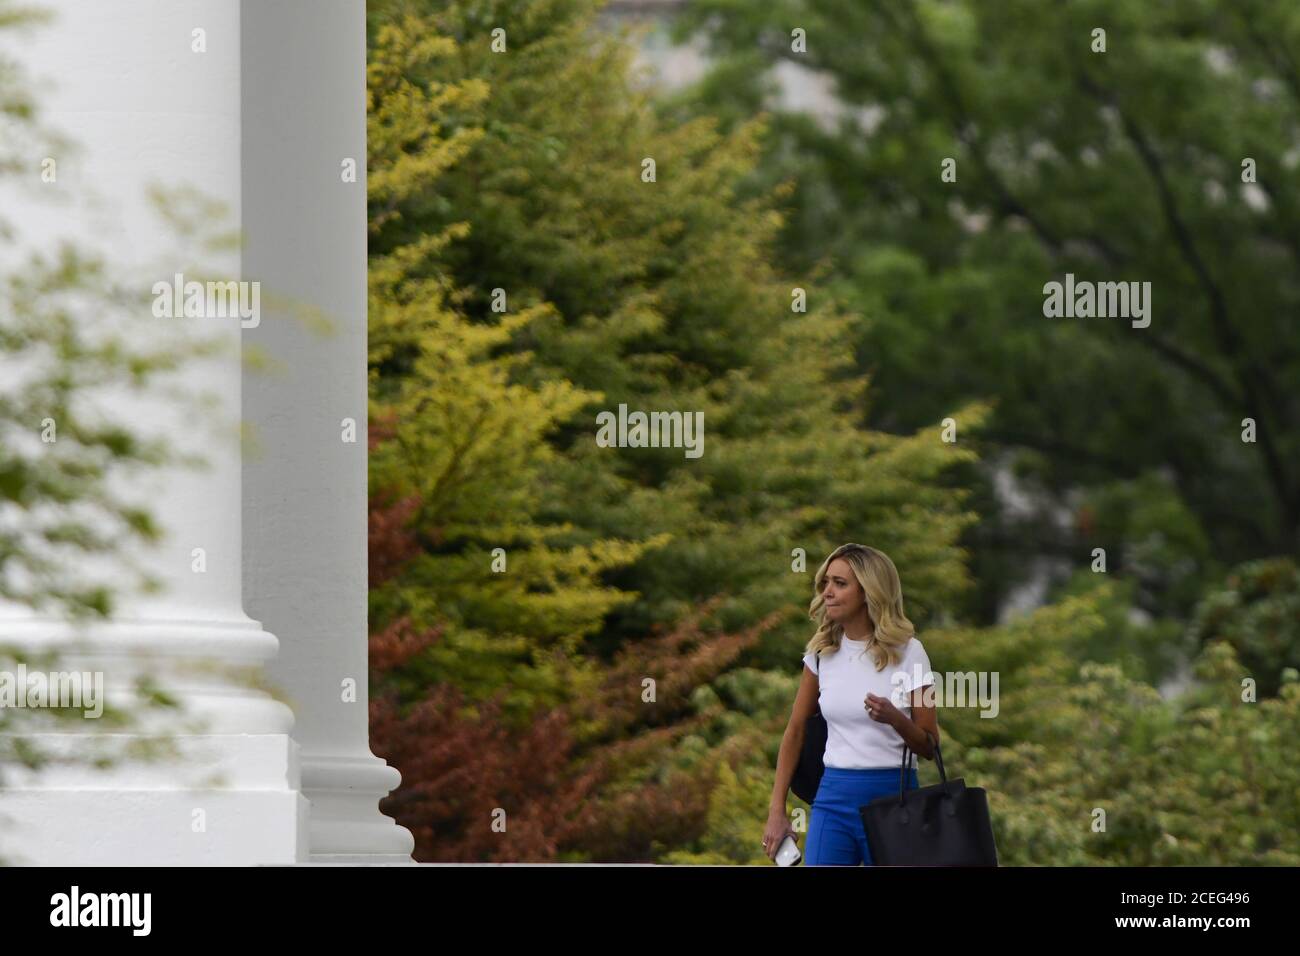 Washington, United States. 01st Sep, 2020. White House Press Secretary Kayleigh McEnany prepares to depart the White House with US President Donald Trump to meet with law enforcement officials in Kenosha in Washington, DC on Tuesday, September 1, 2020. Photo by Rod Lamkey/UPI Credit: UPI/Alamy Live News Stock Photo